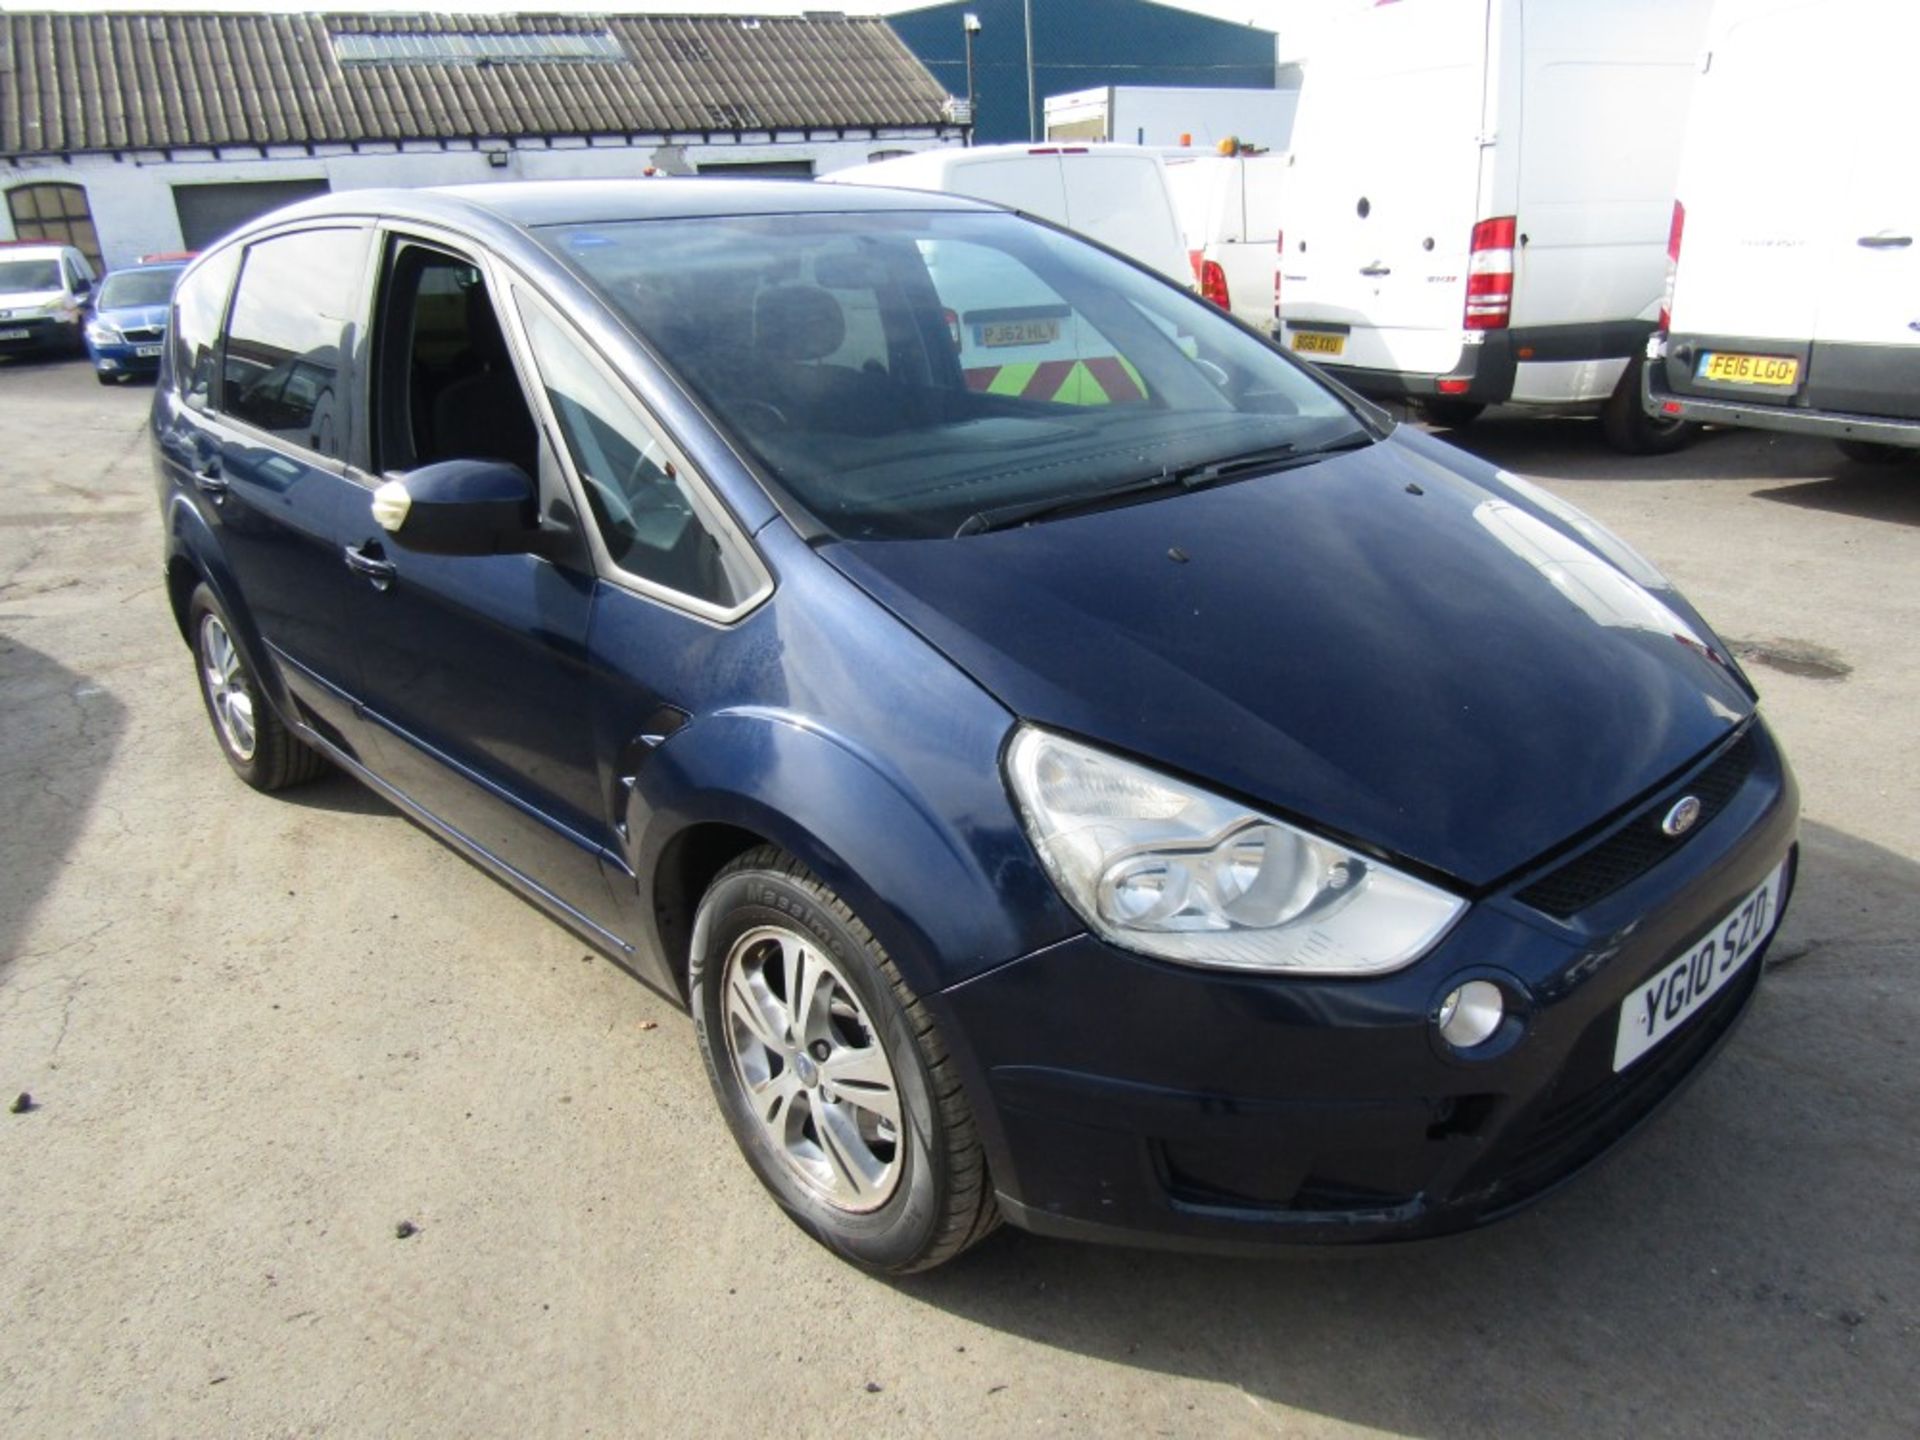 10 reg FORD GALAXY DIESEL 7 SEATER, 1ST REG 06/10, TEST 08/23, 98549M, V5 HERE, 4 FORMER KEEPERS [NO